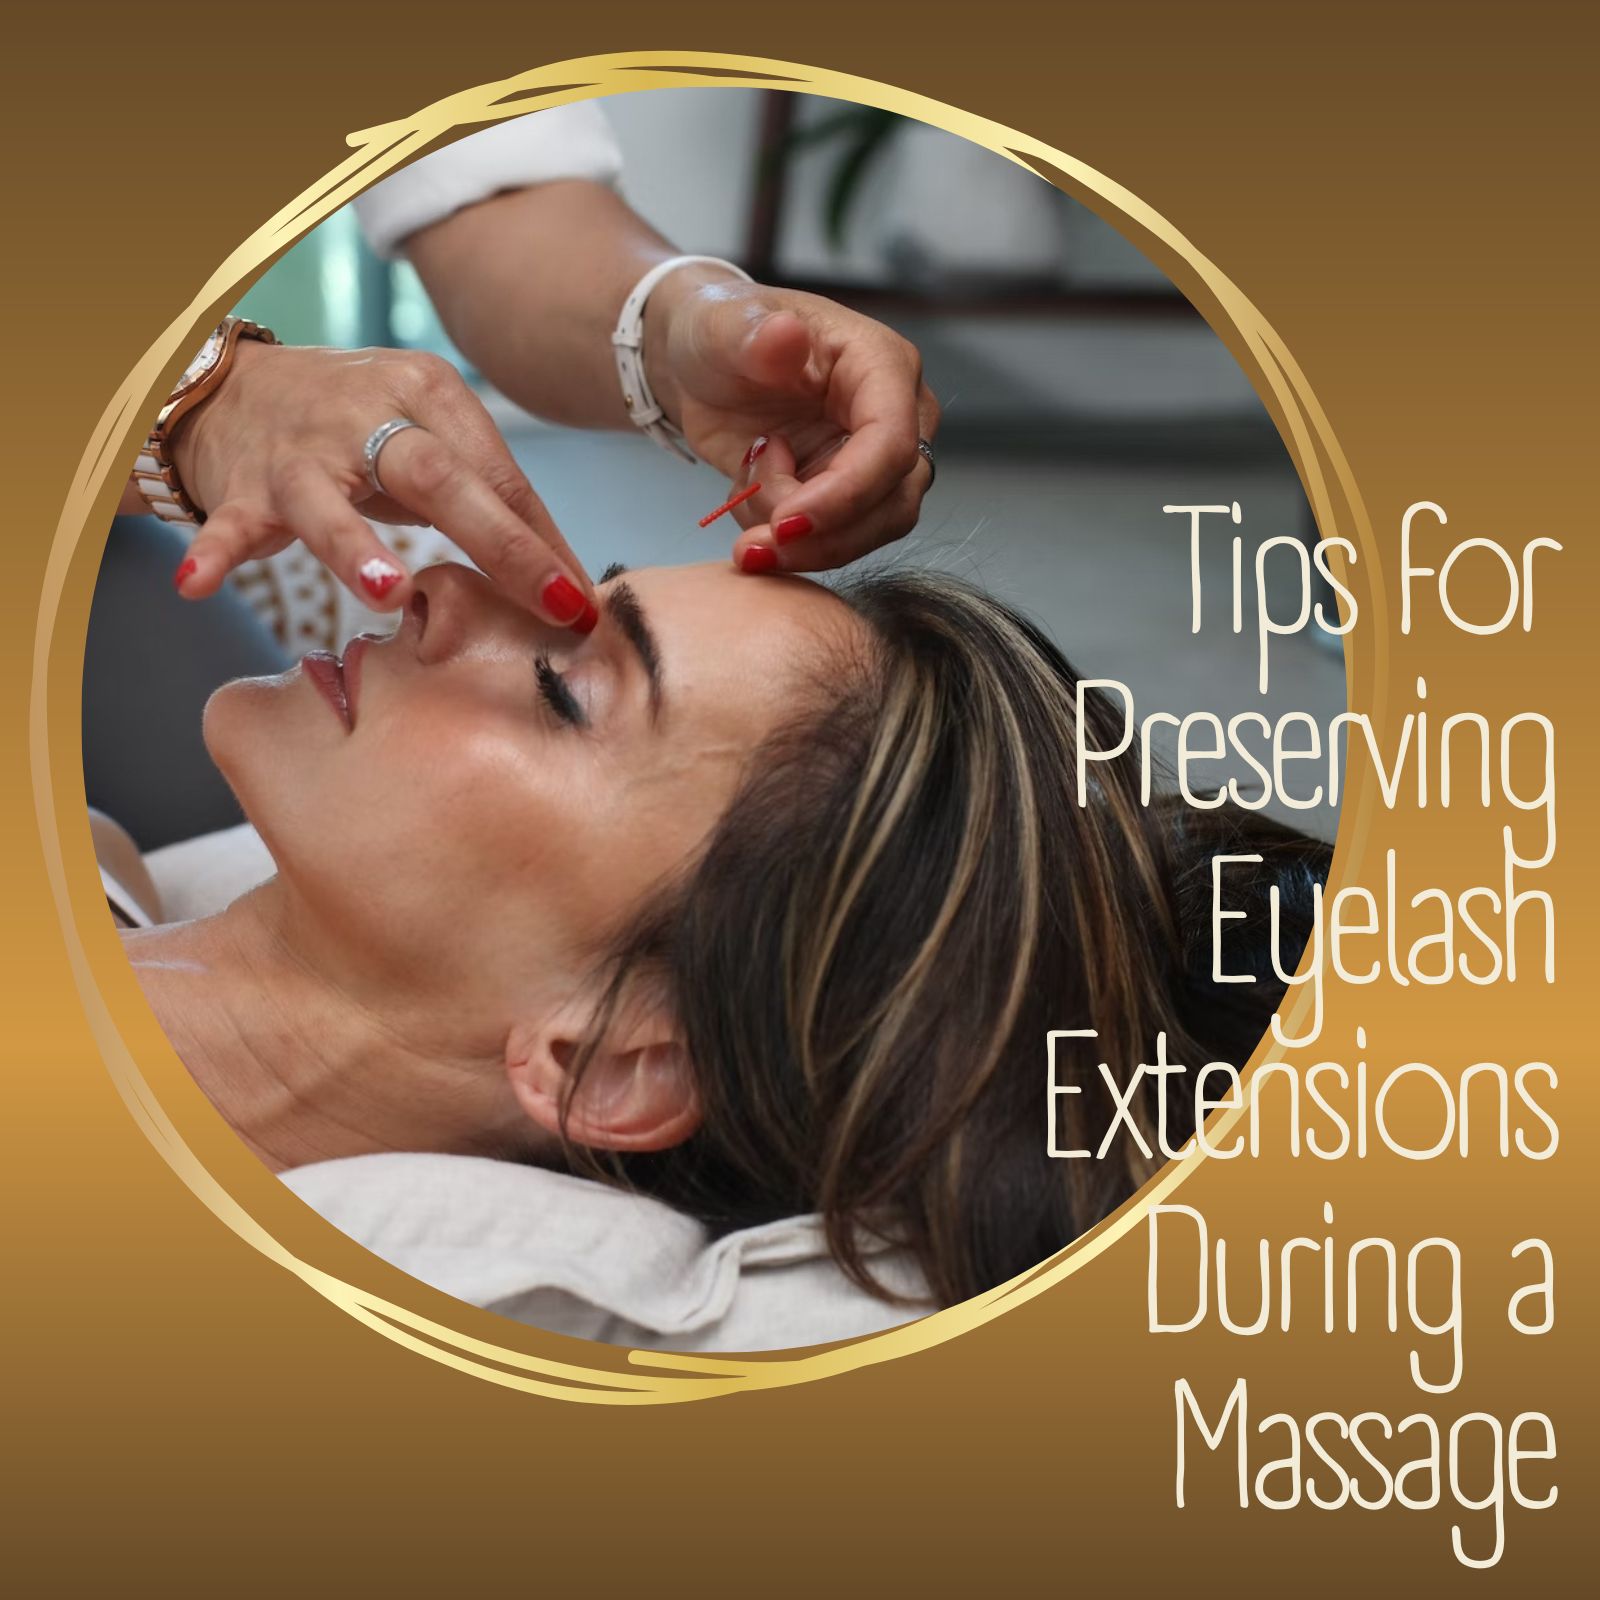 Tips for Preserving Eyelash Extensions During a Massage